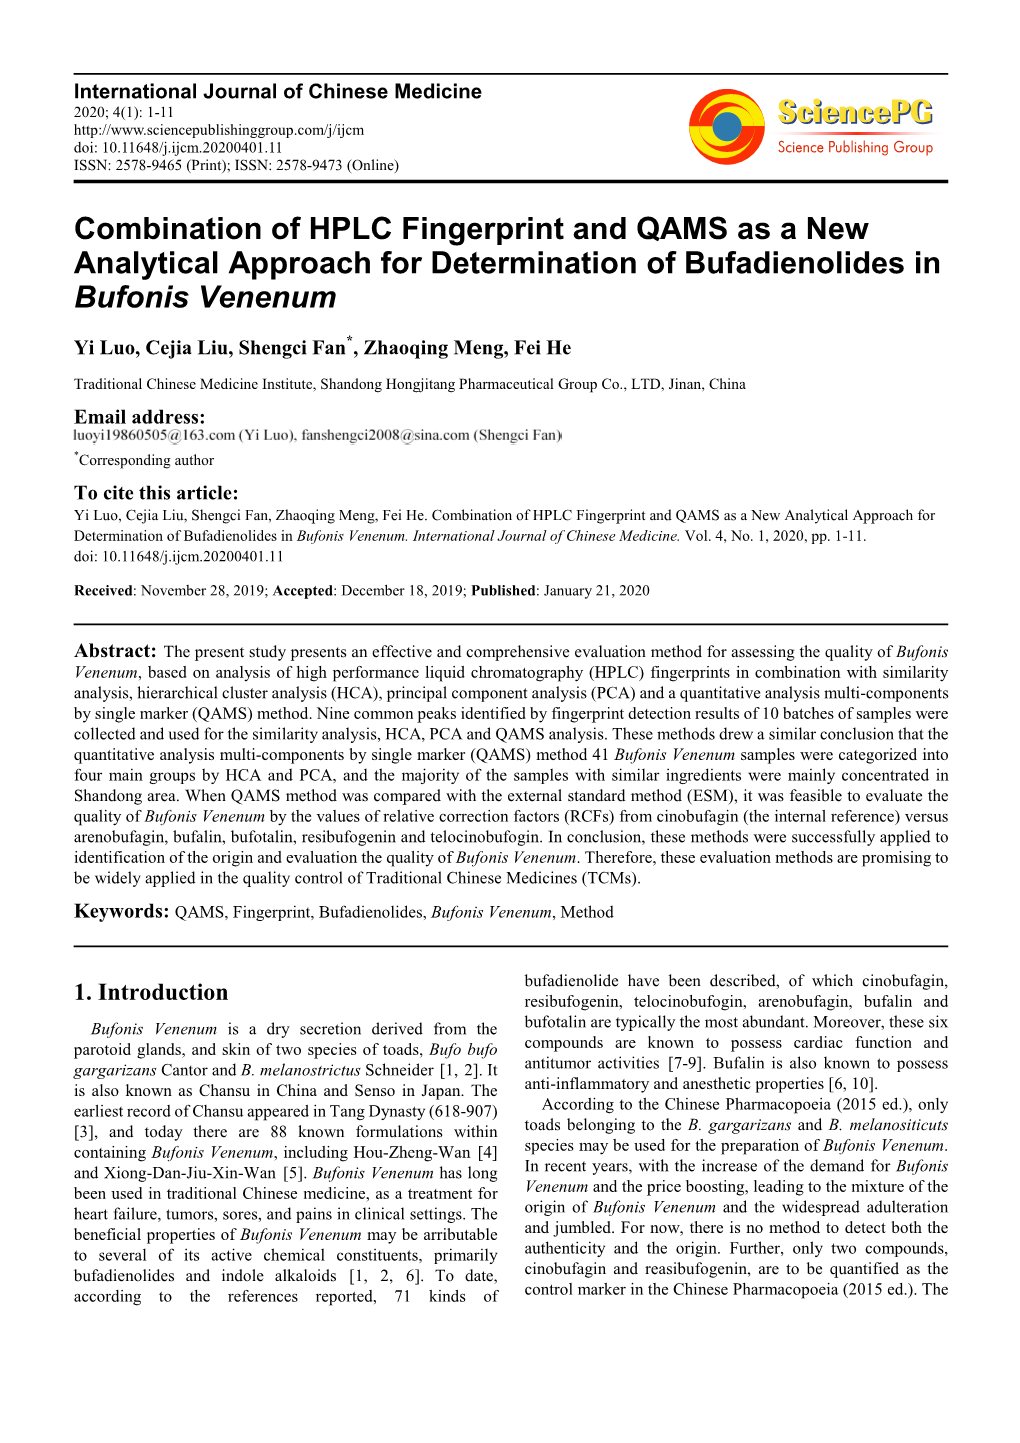 Combination of HPLC Fingerprint and QAMS As a New Analytical Approach for Determination of Bufadienolides in Bufonis Venenum